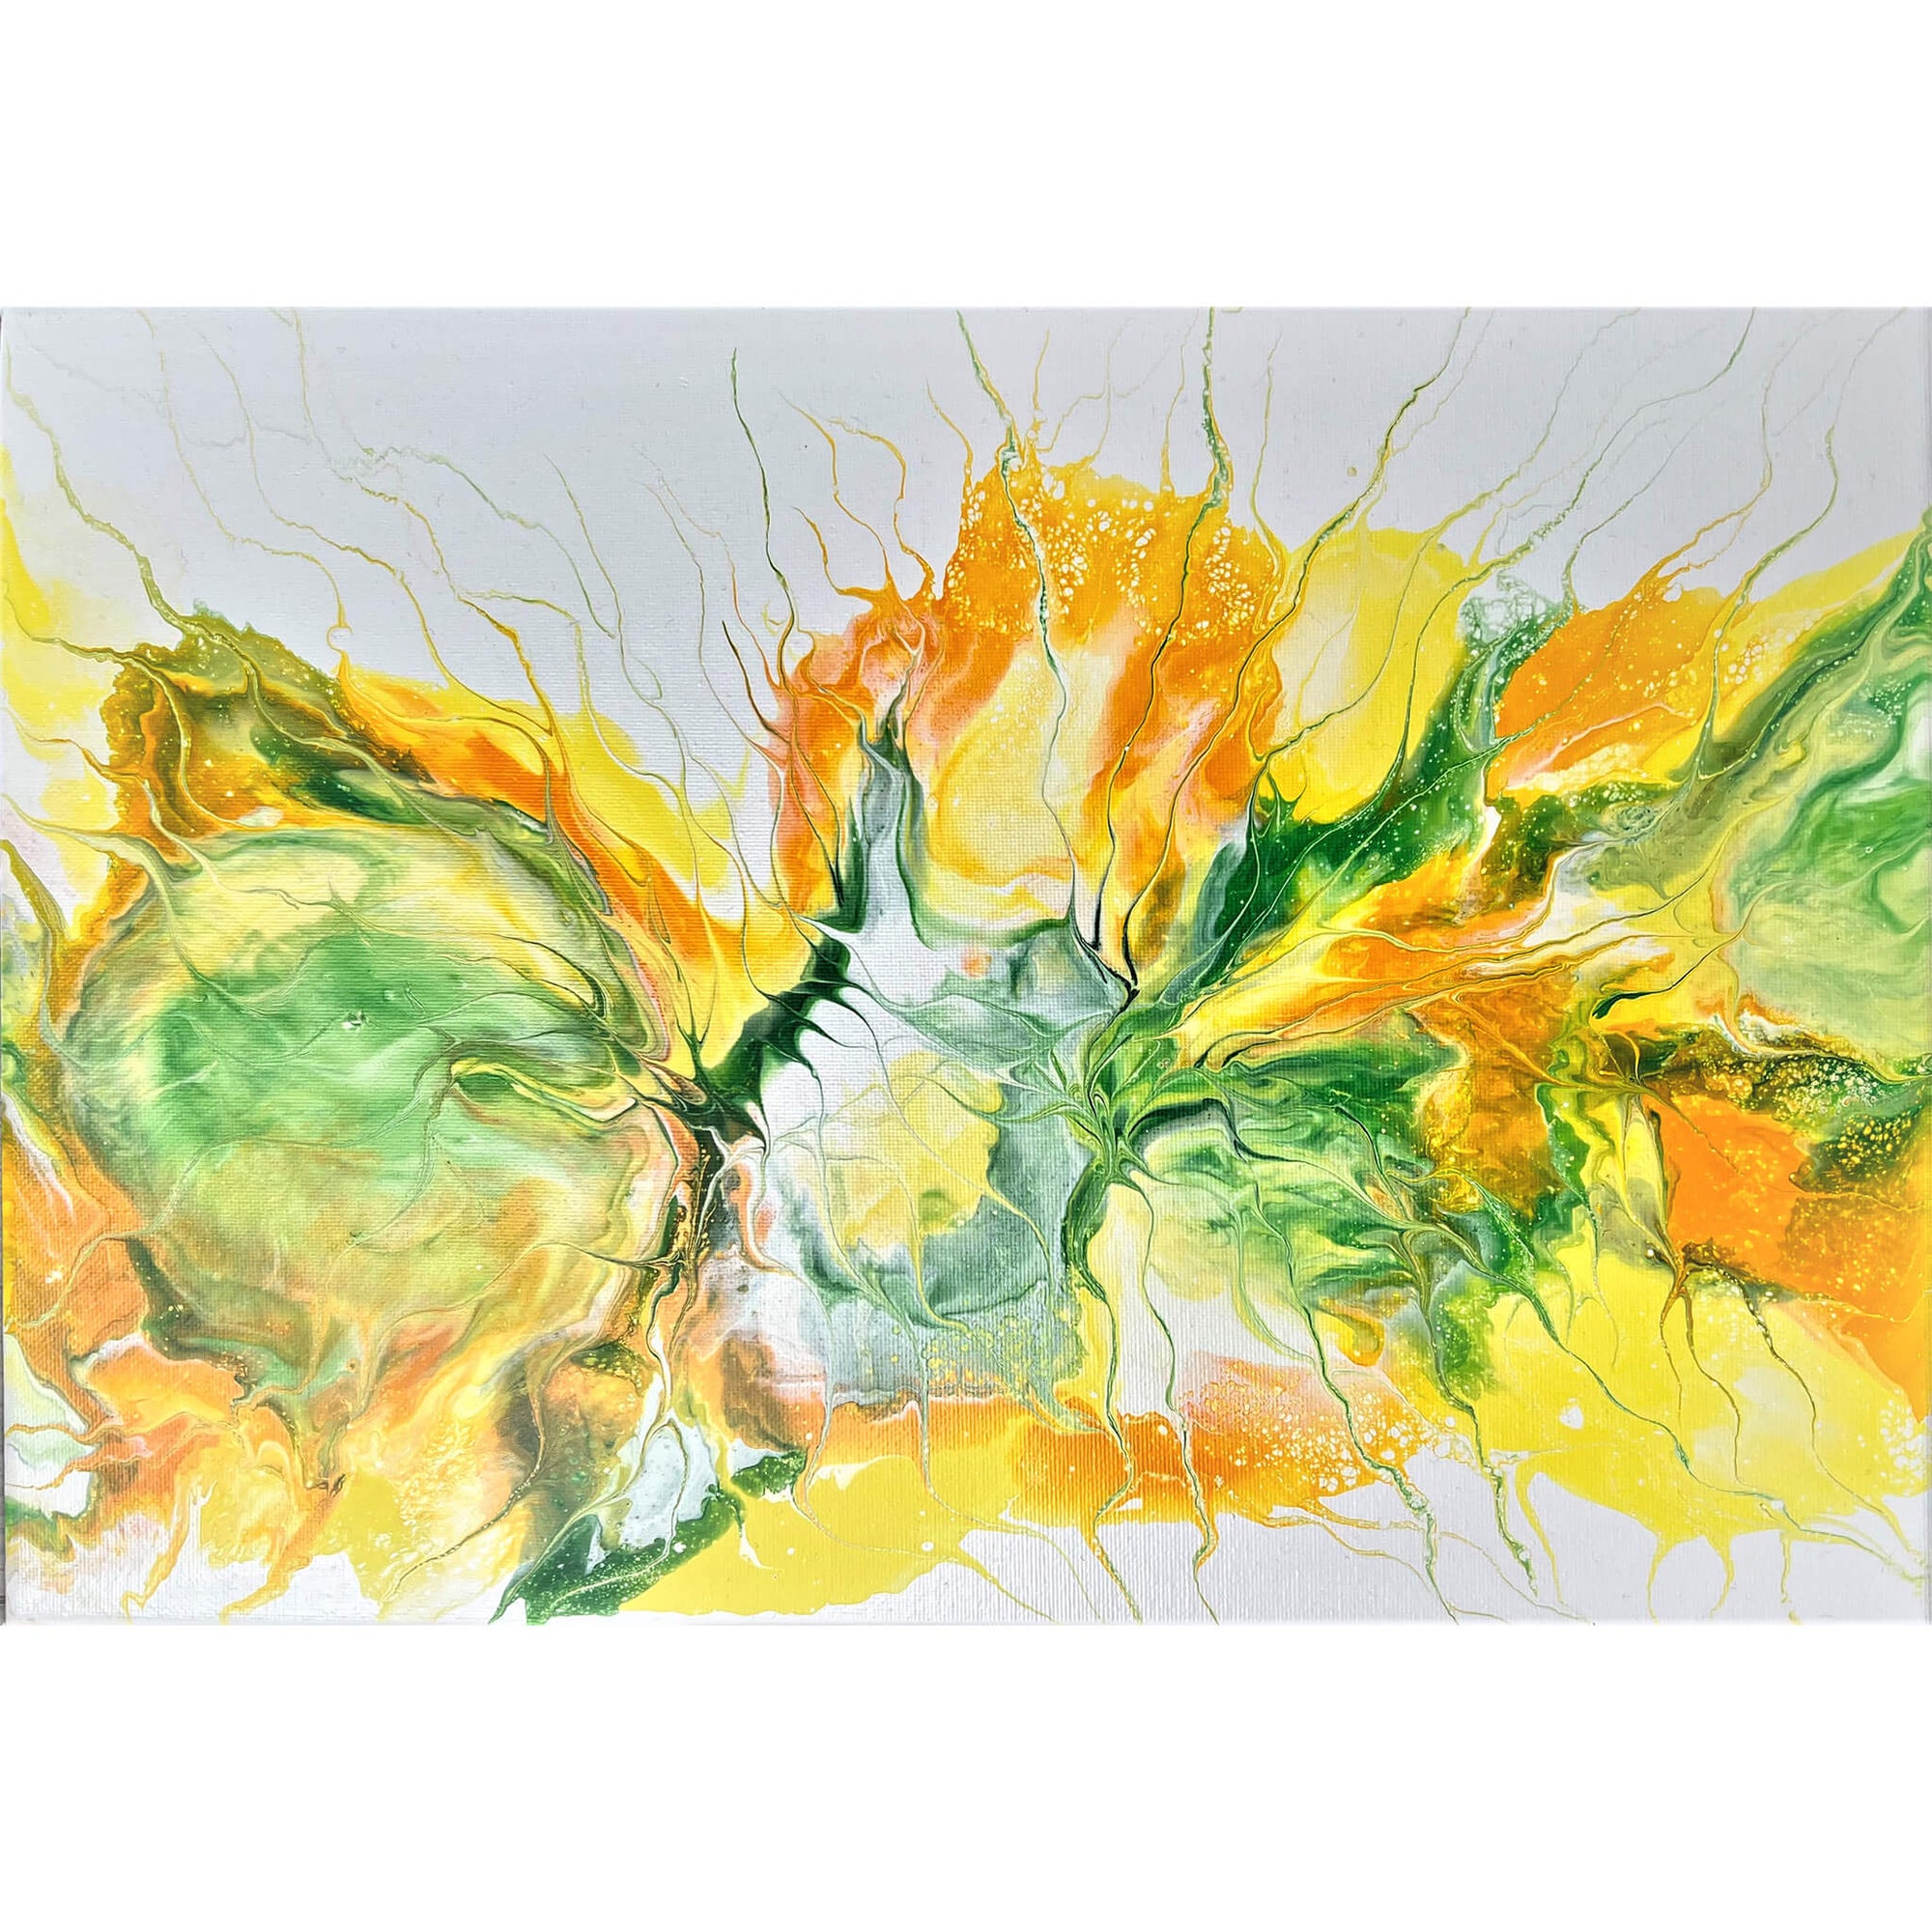 Spring Dancer is an original acrylic on canvas painting in orange, yellow and green by artist Vicki Demirdjian